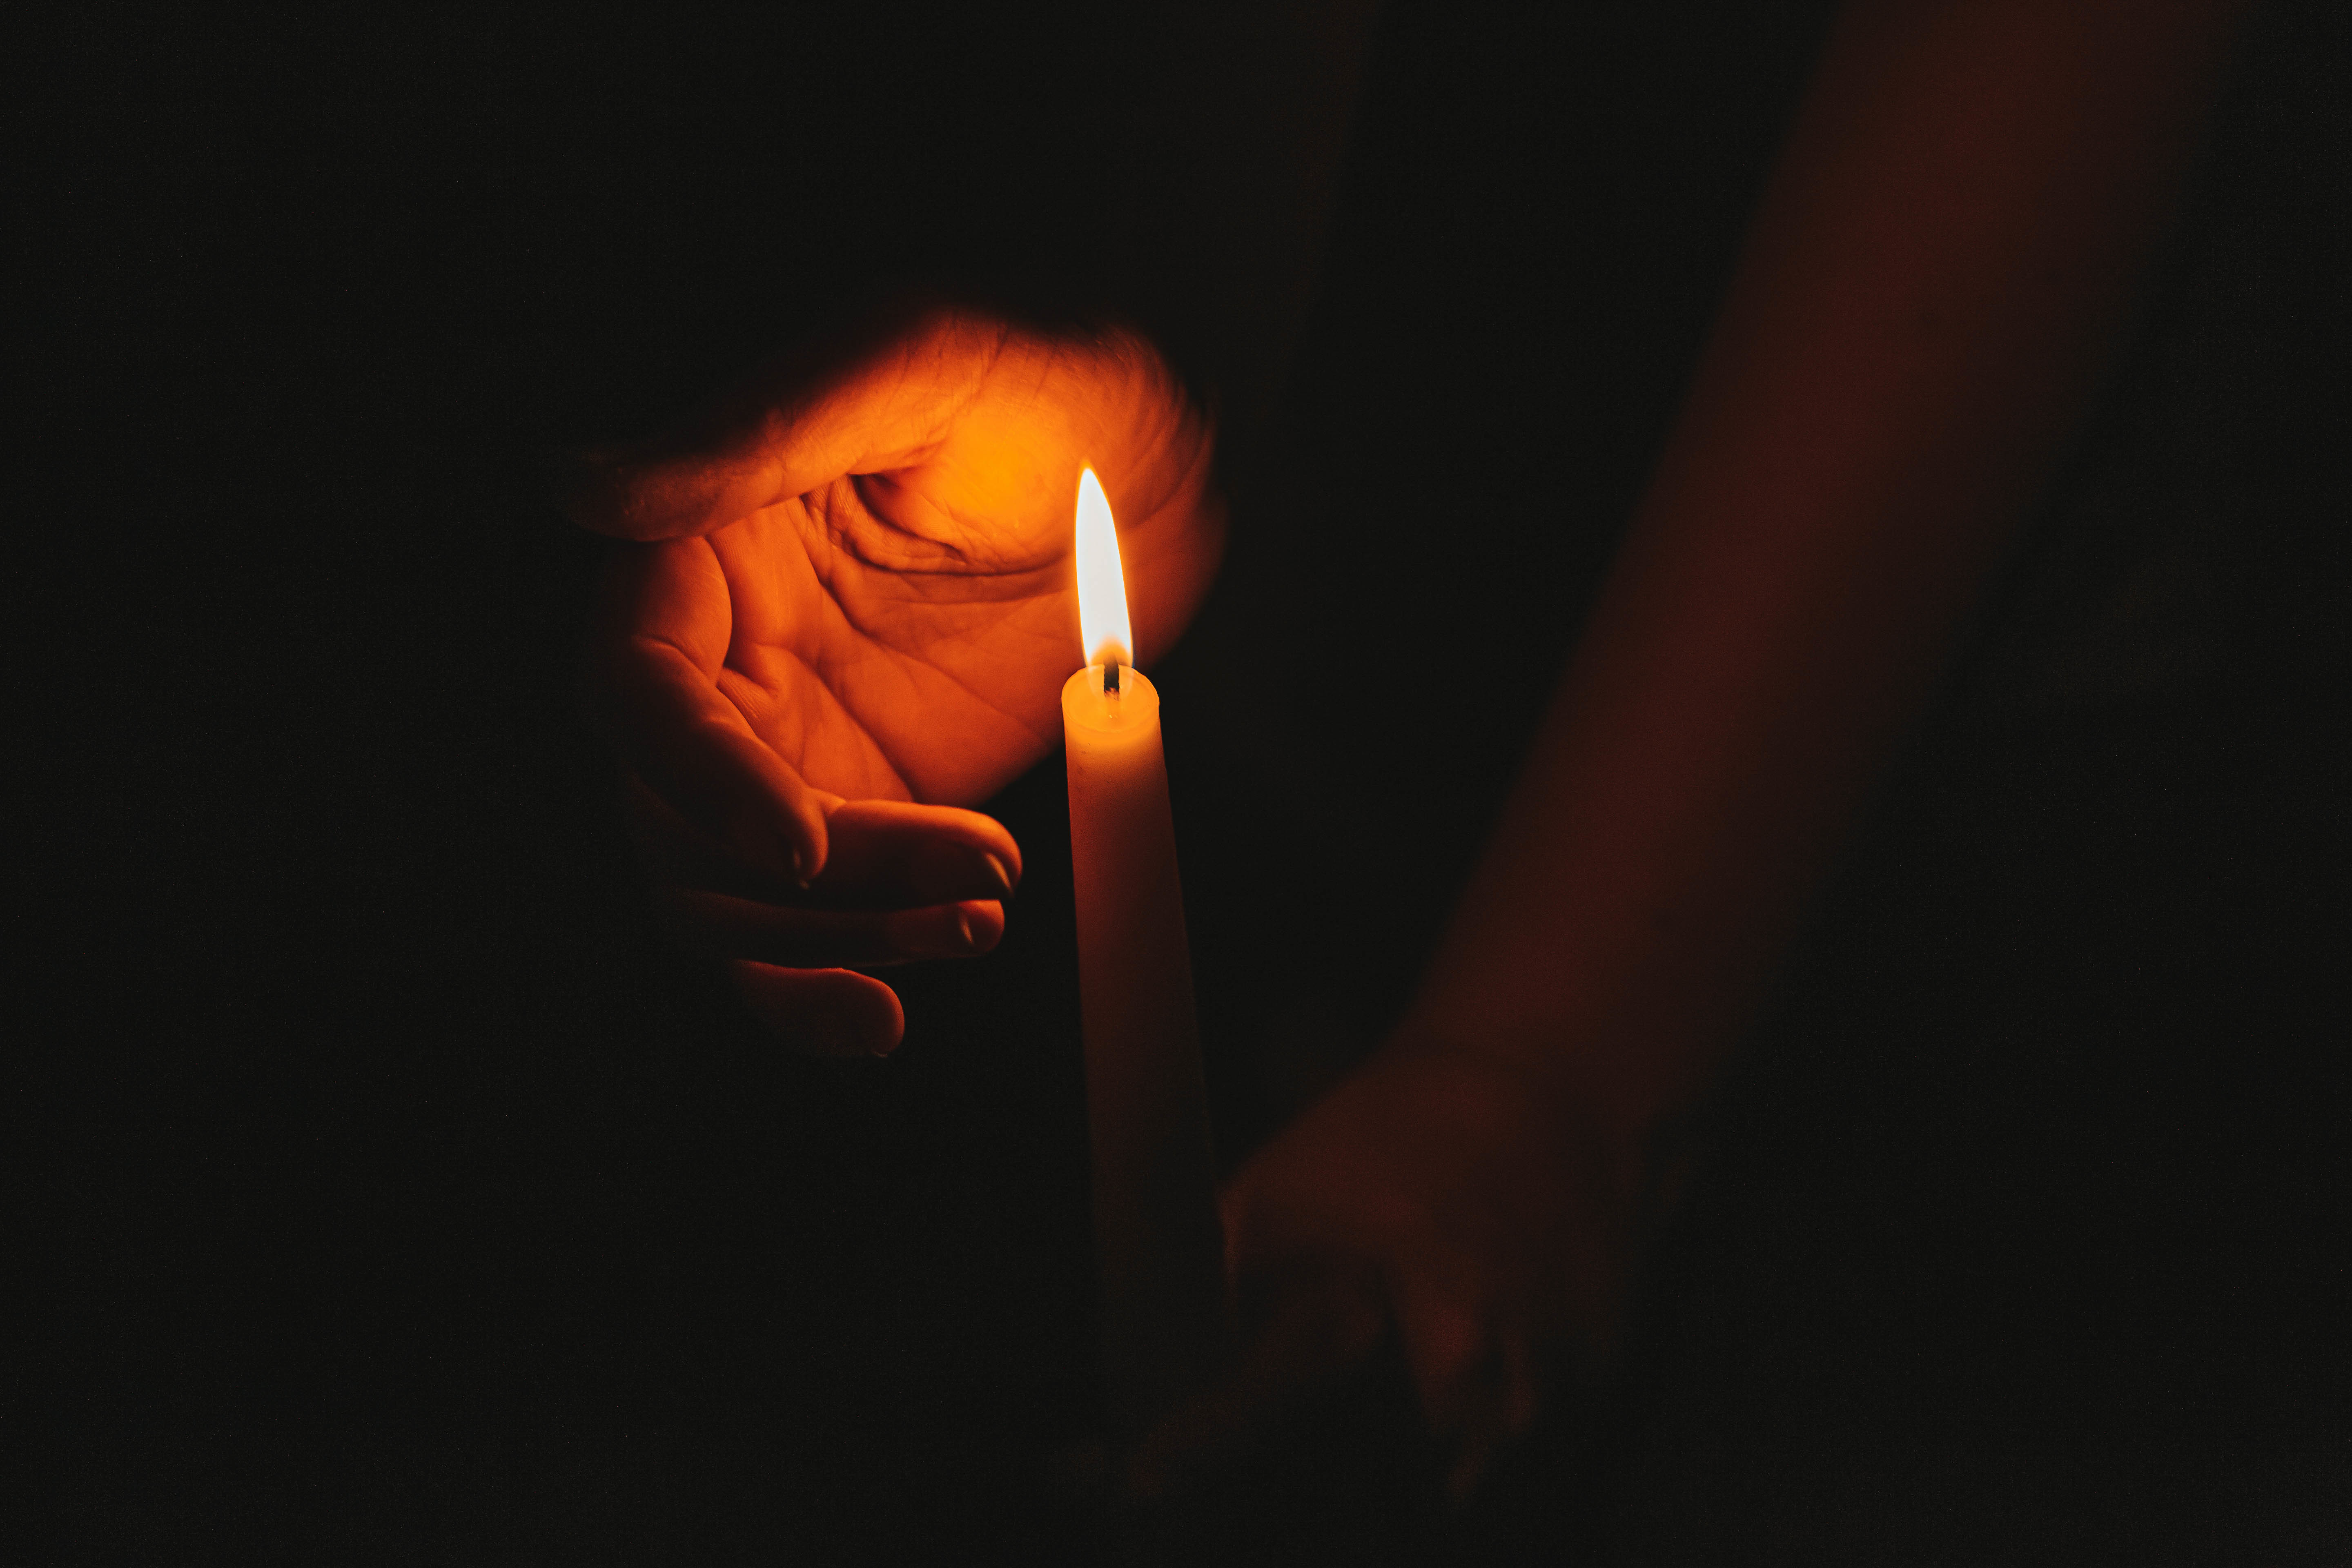 85953 free wallpaper 240x320 for phone, download images candle, hands, dark, flame 240x320 for mobile